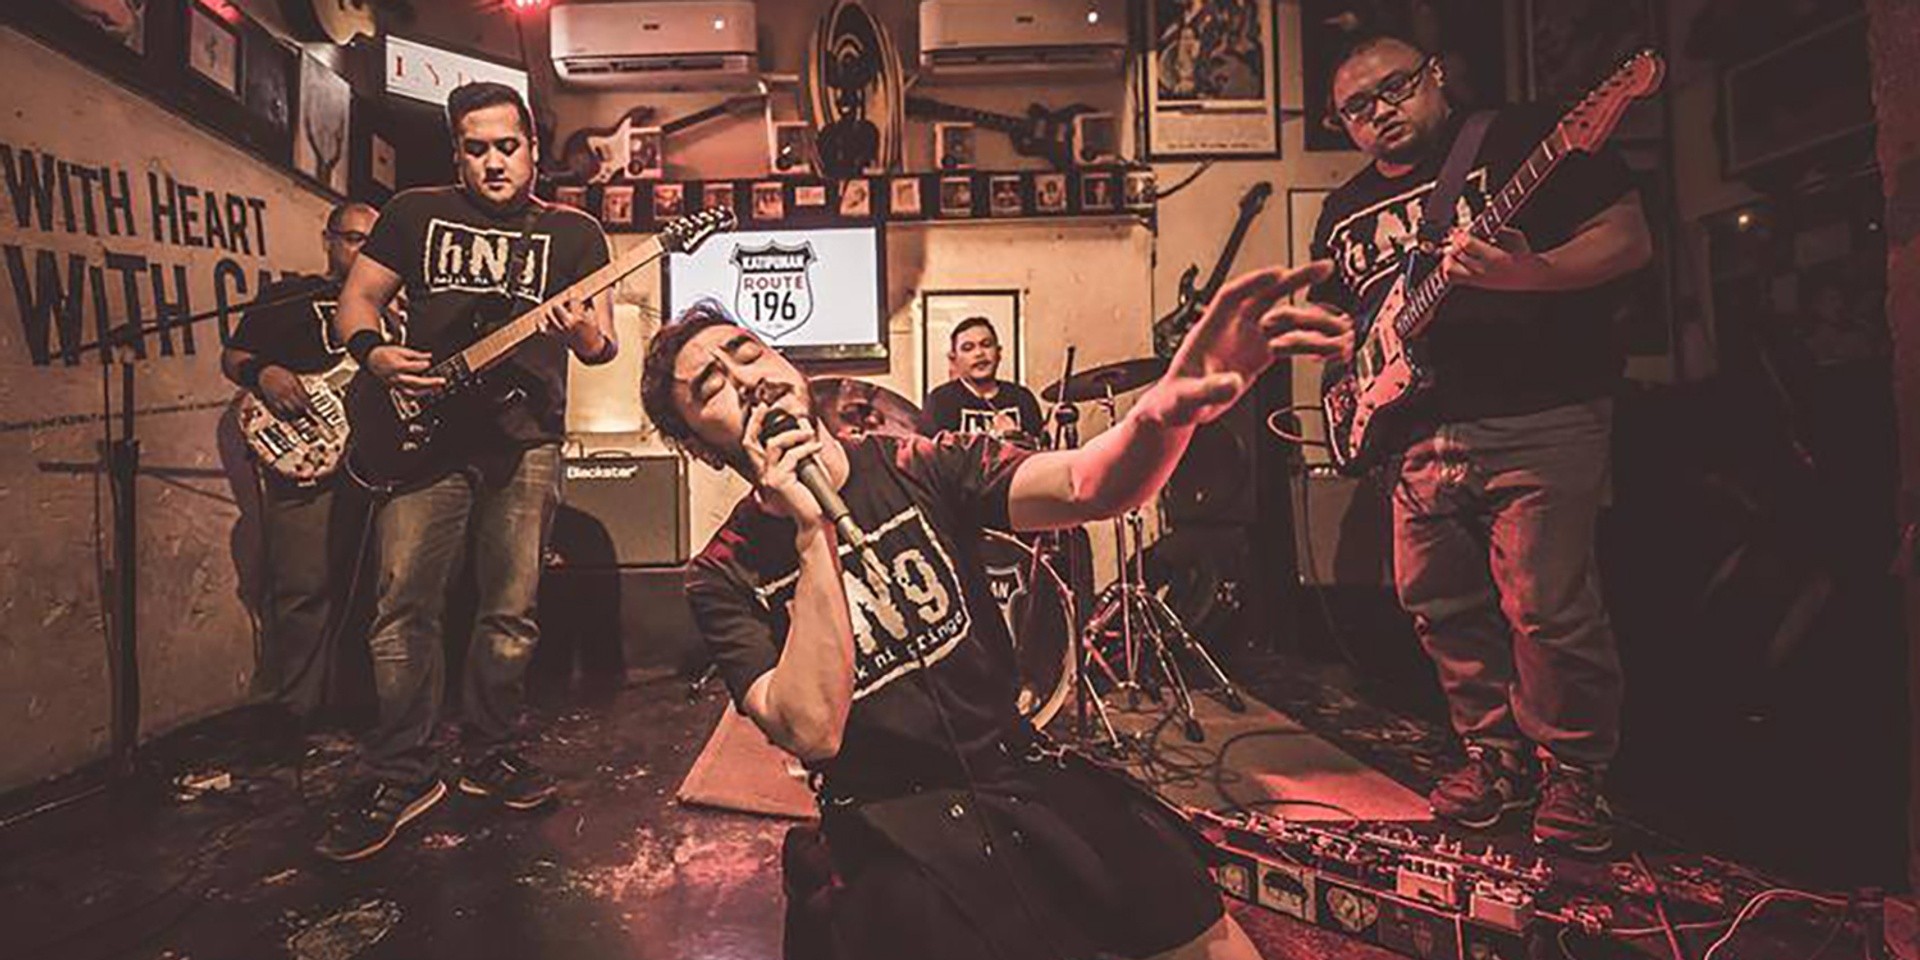 Halik Ni Gringo unveil new single 'I Woke Up and Fell Out of Love' – listen